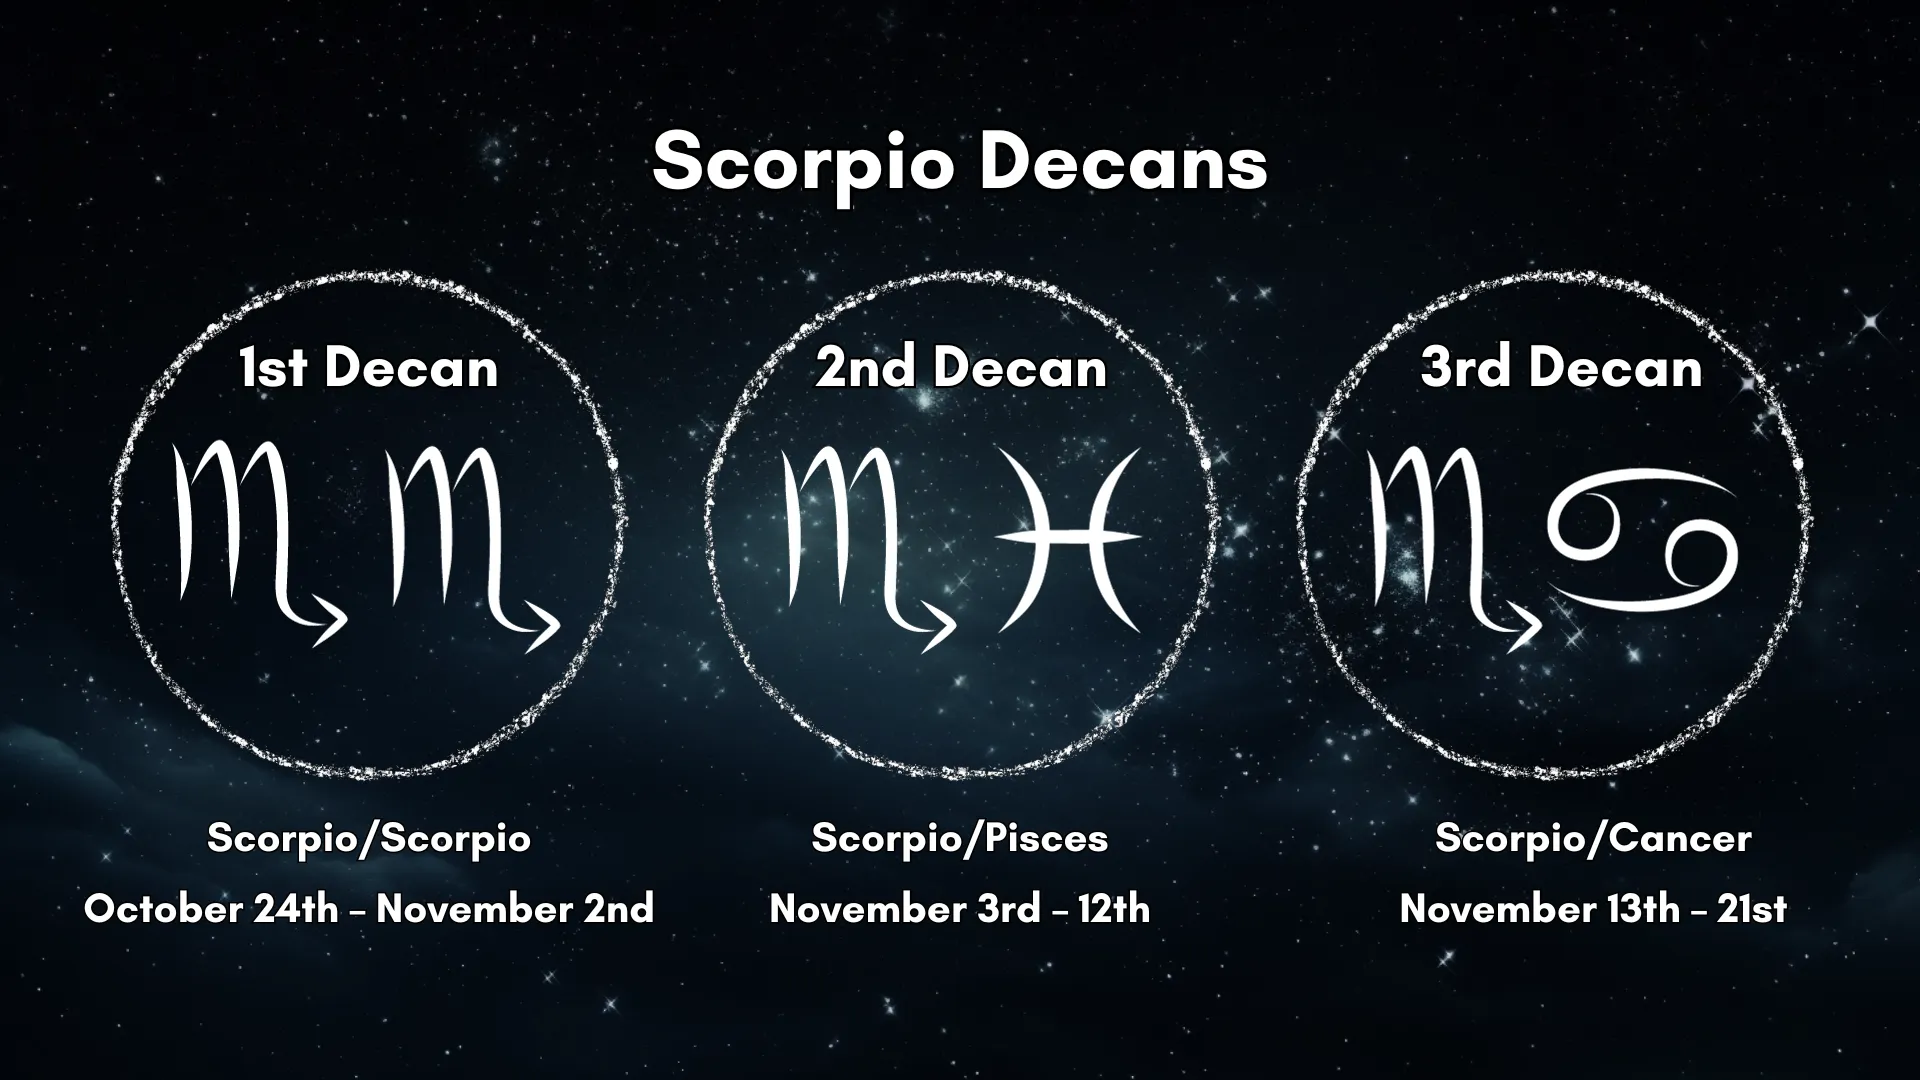 The Scorpio Decans are laid out in a chart that is easy to understand.